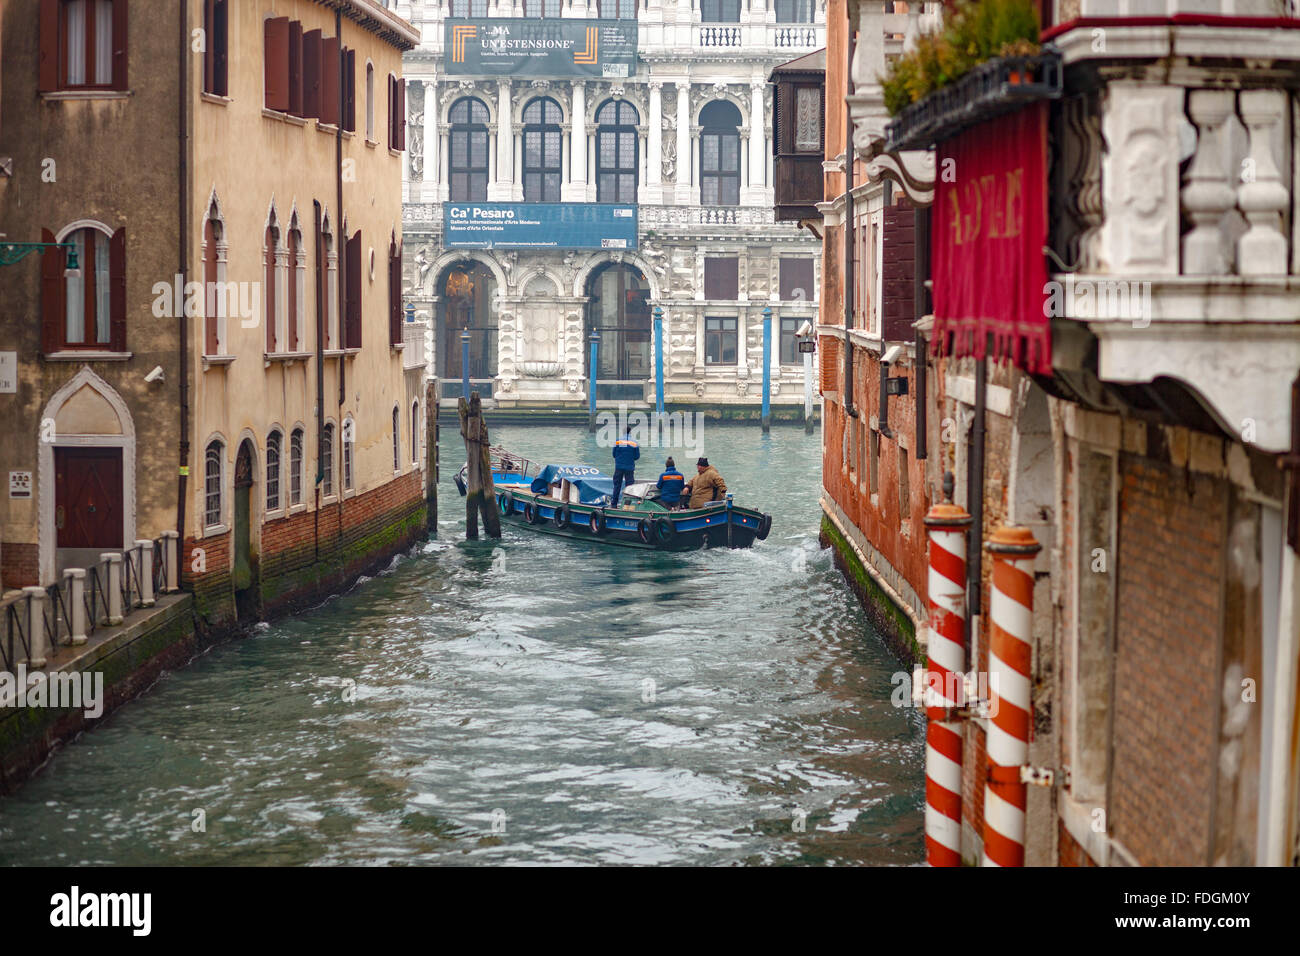 Transporting with small boats on canals in Venice Italy Stock Photo